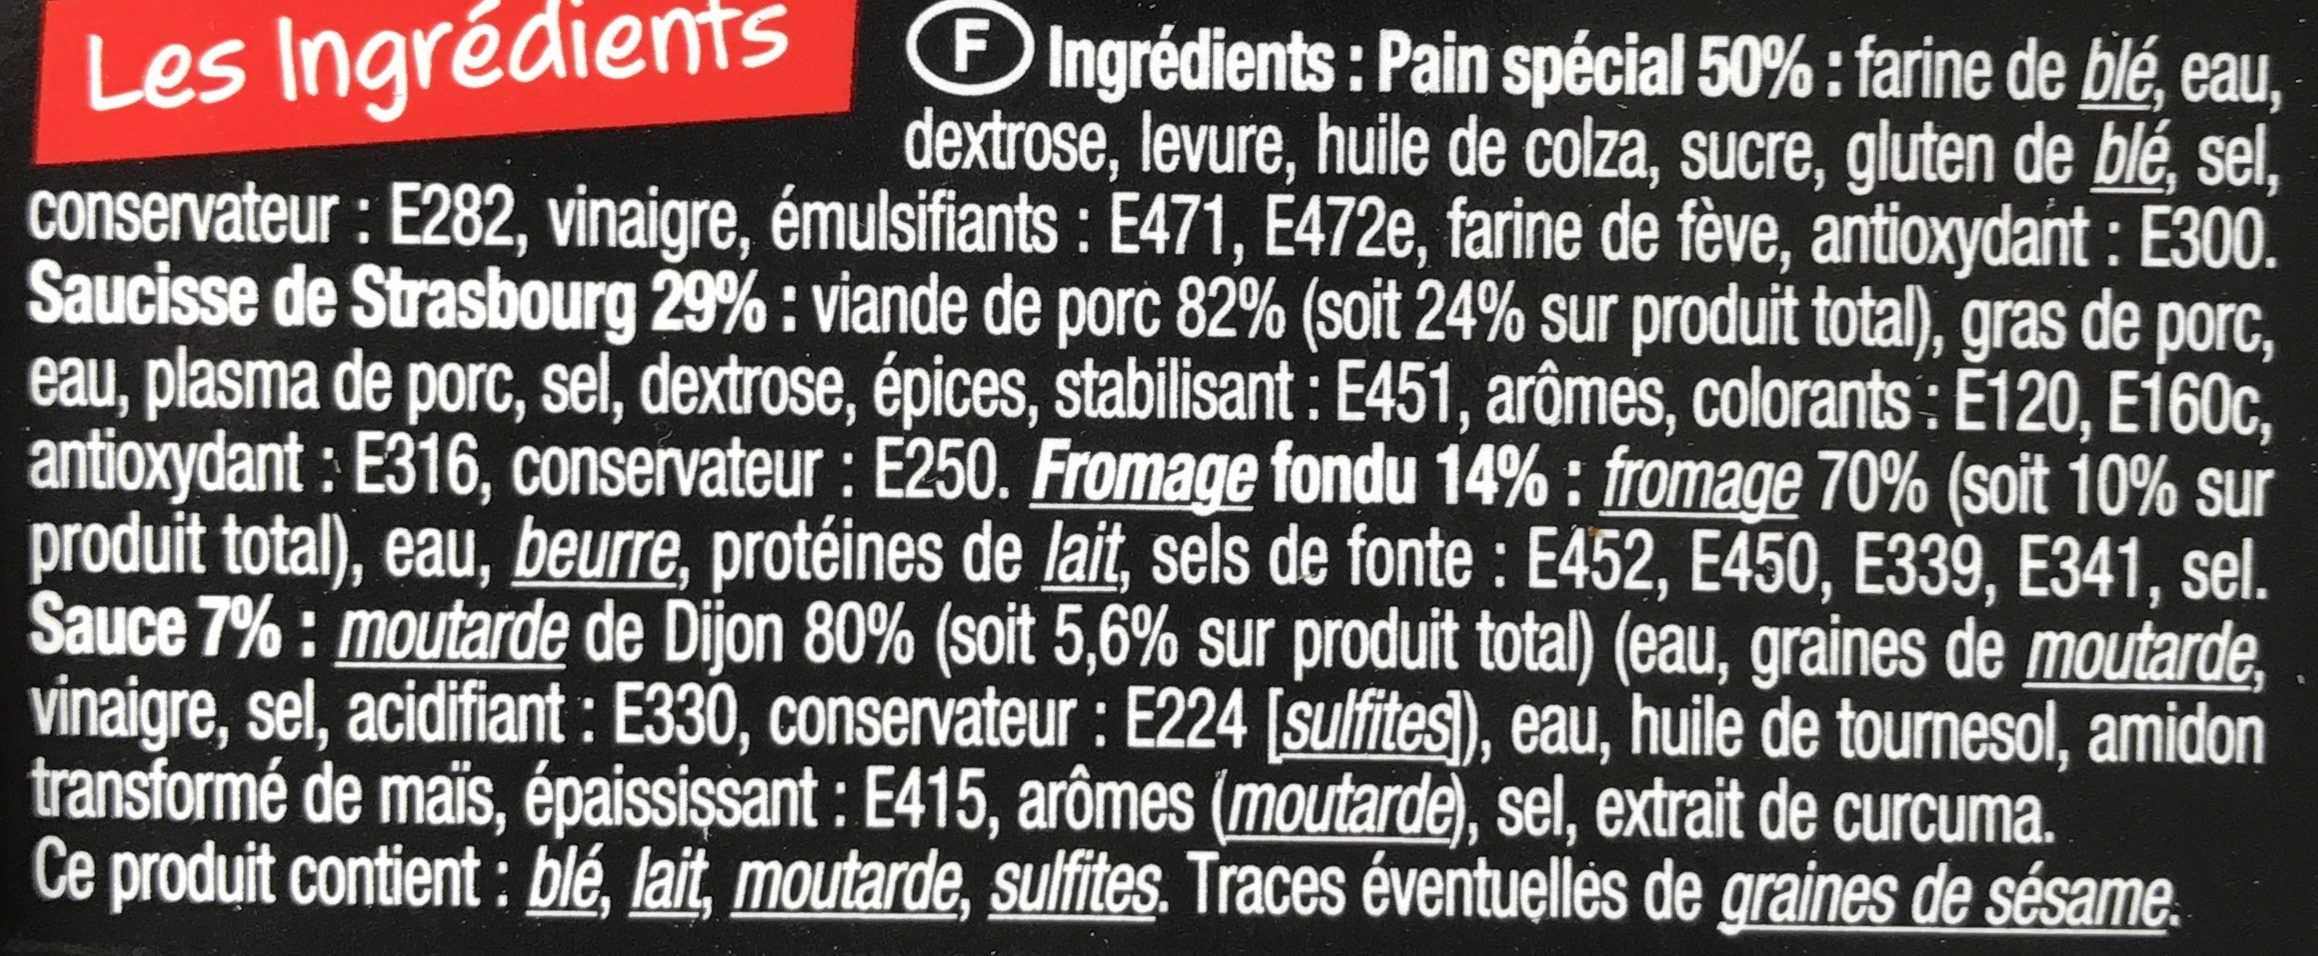 2 Hot Dogs saveur moutarde - Ingredients - fr